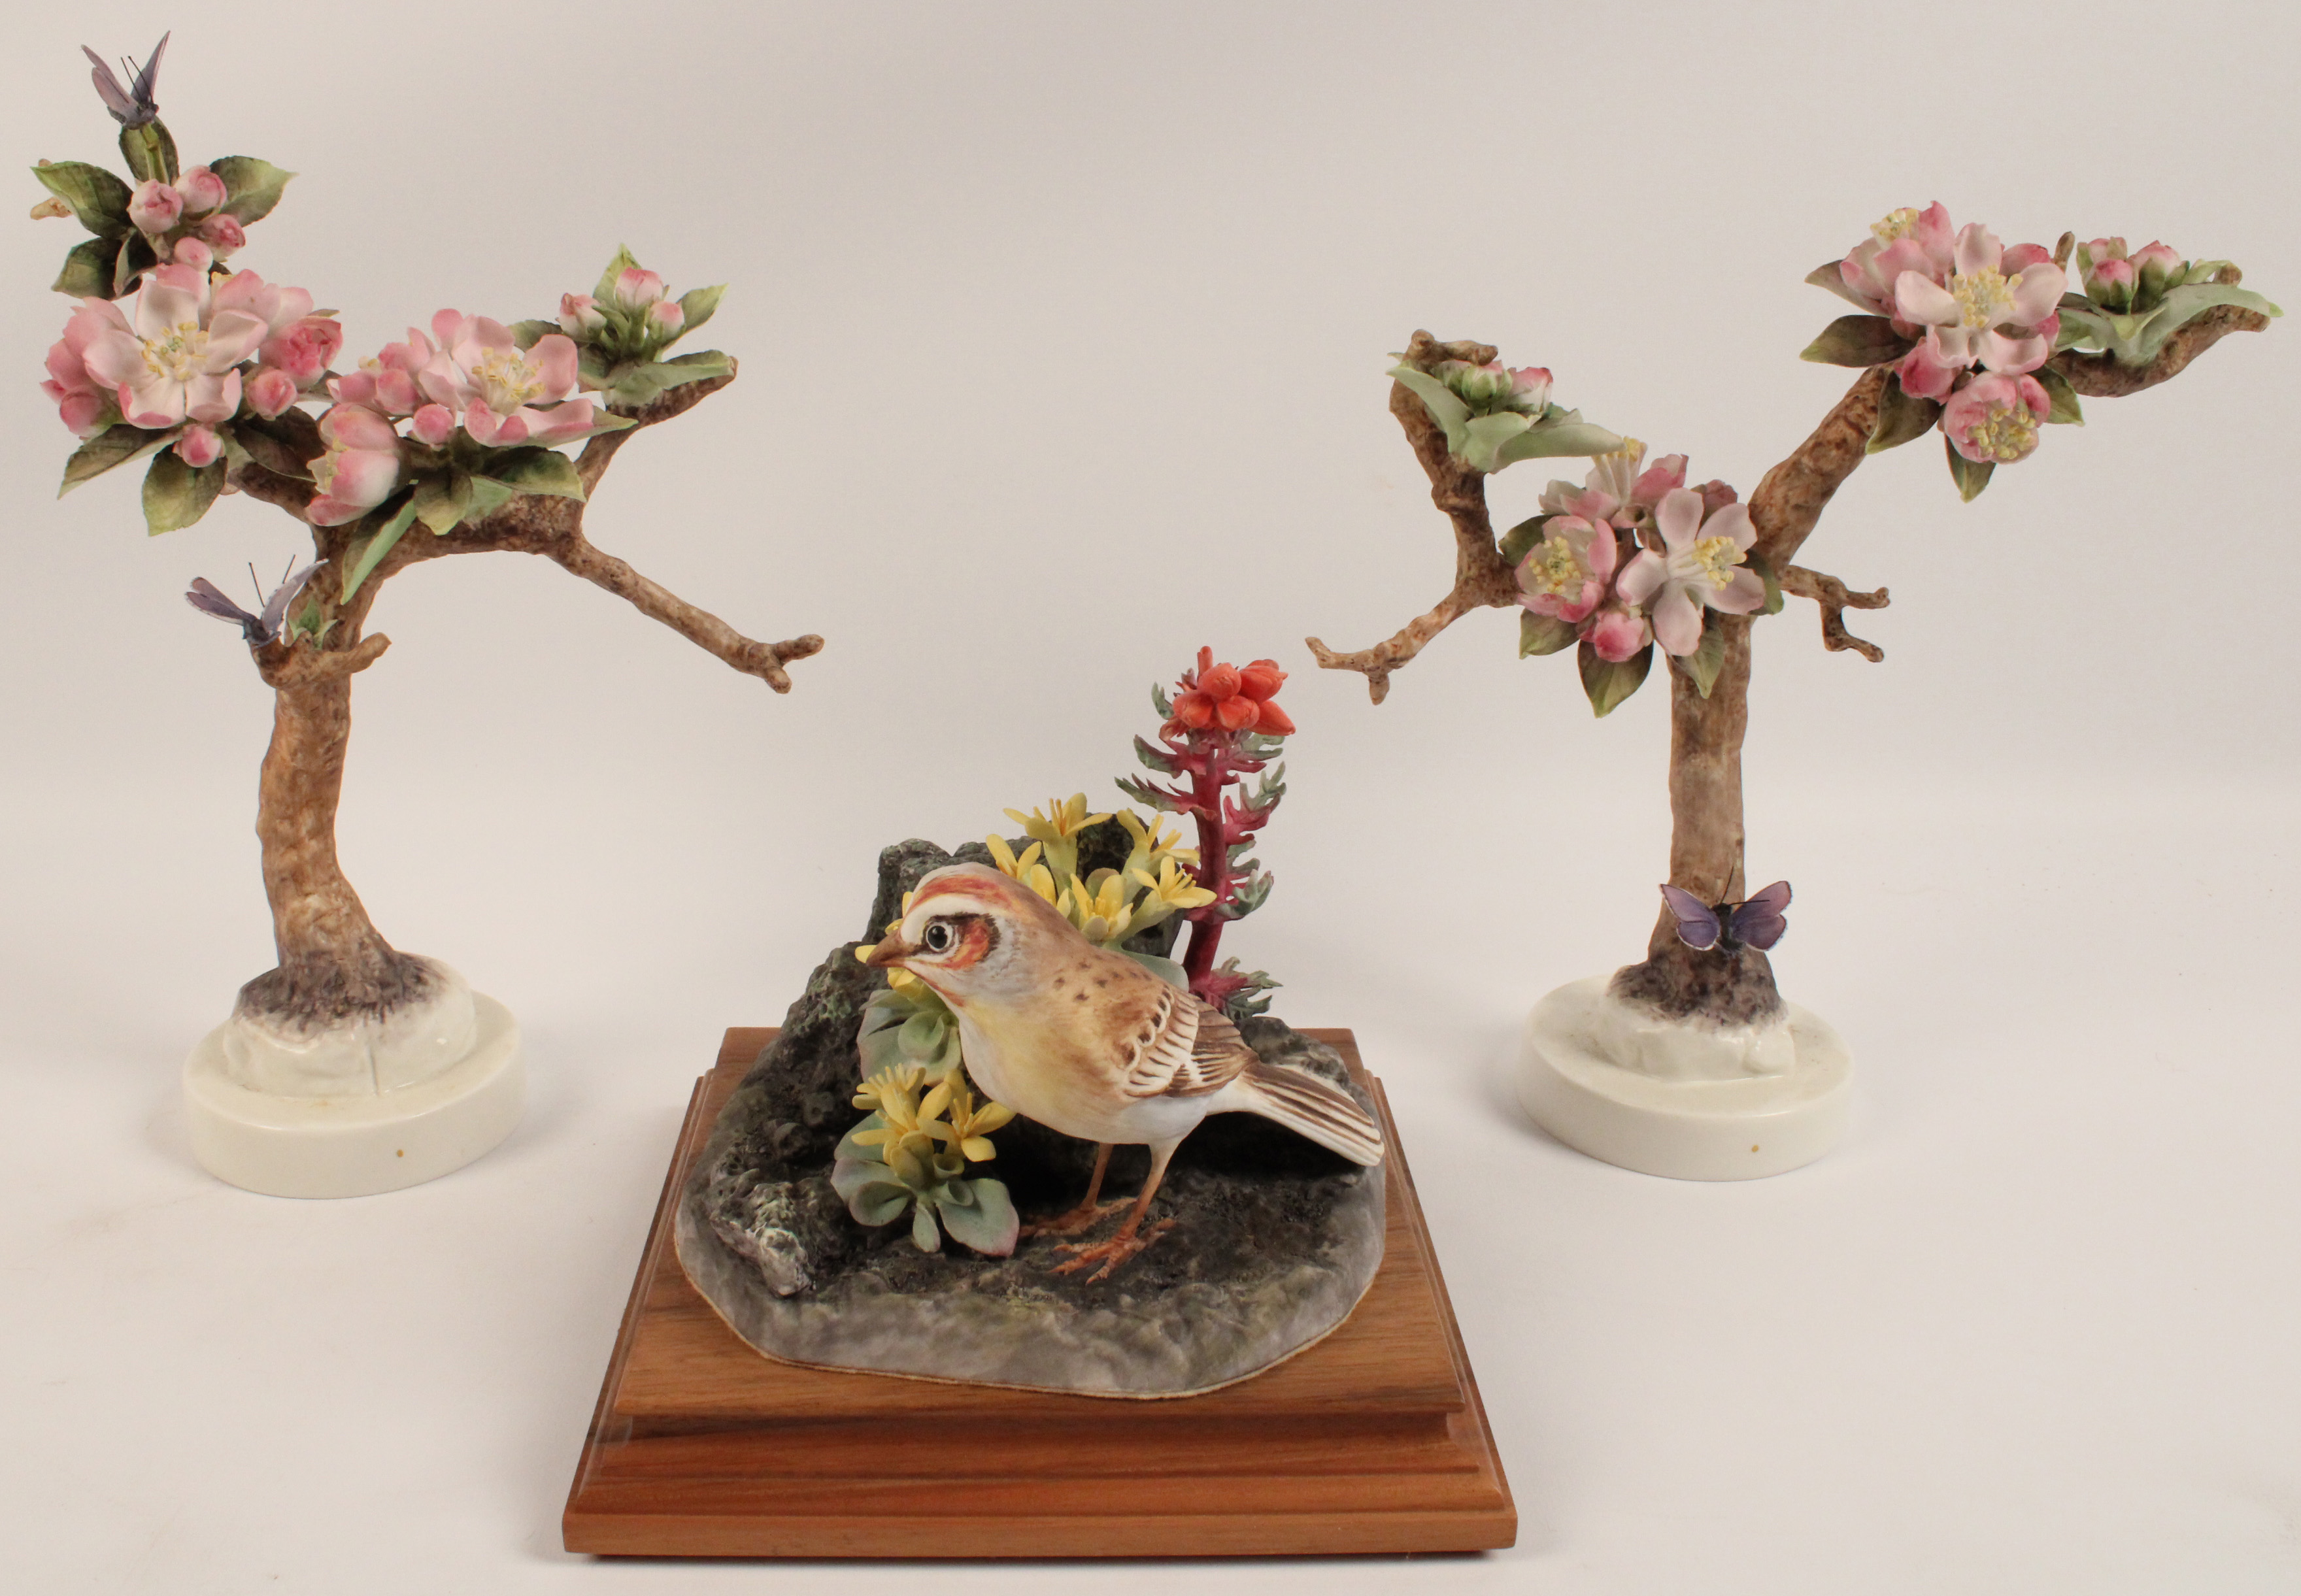 GROUP OF 3 PORCELAIN MODELS BY 35f7a7